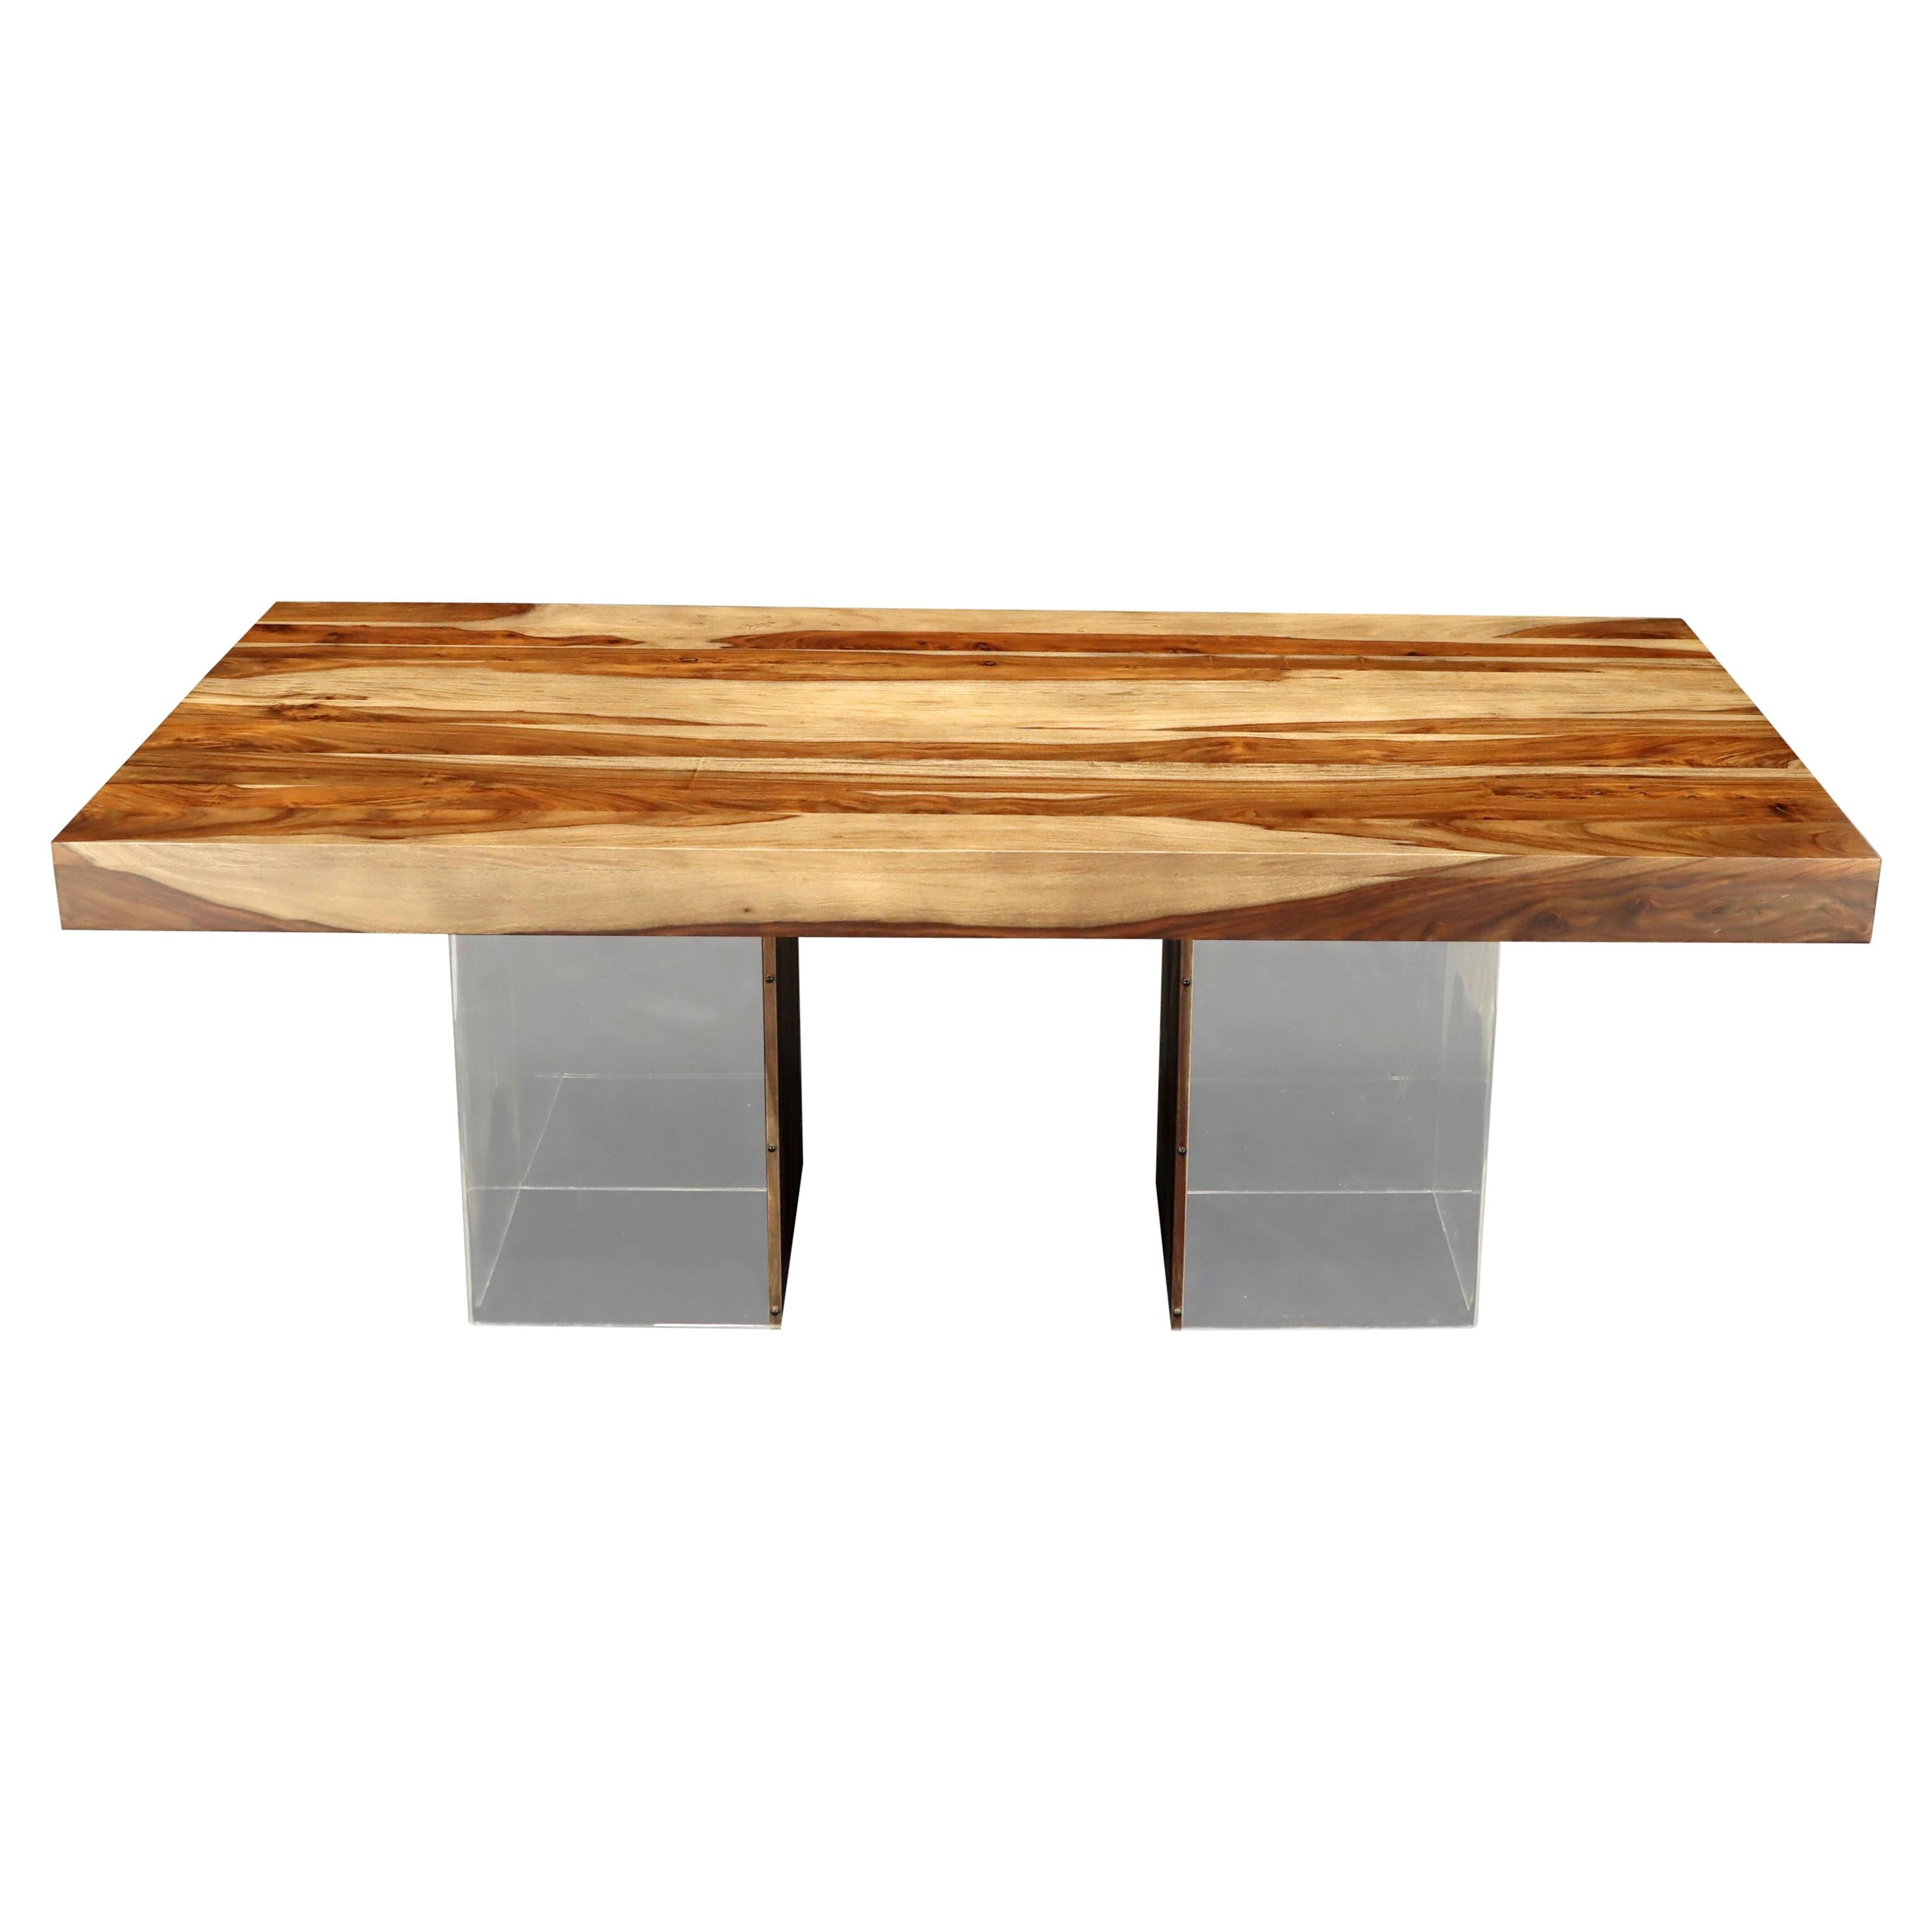 Large Solid Oiled Teak Rectangular Dining Table on Lucite Base